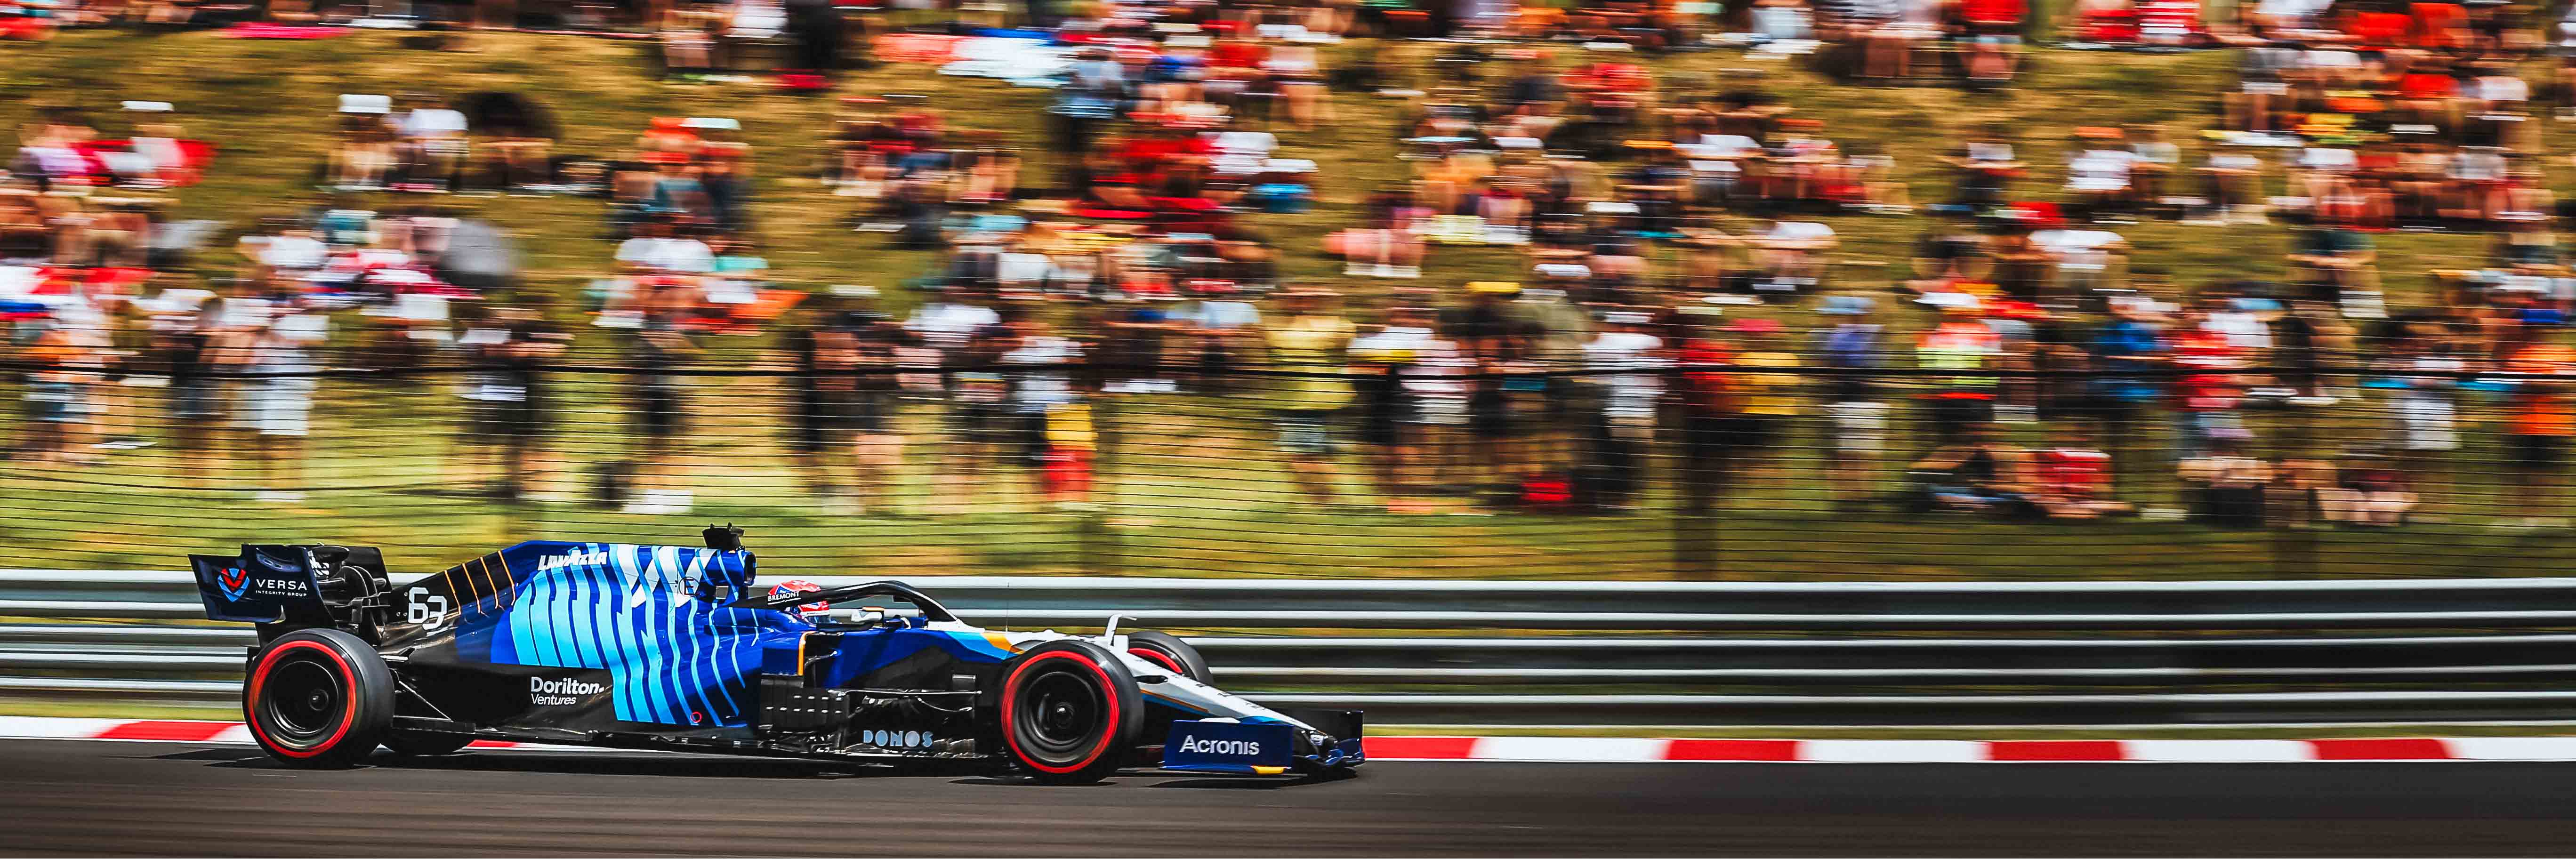 George Russell en route to his first points with Williams at the 2021 Hungarian Grand Prix